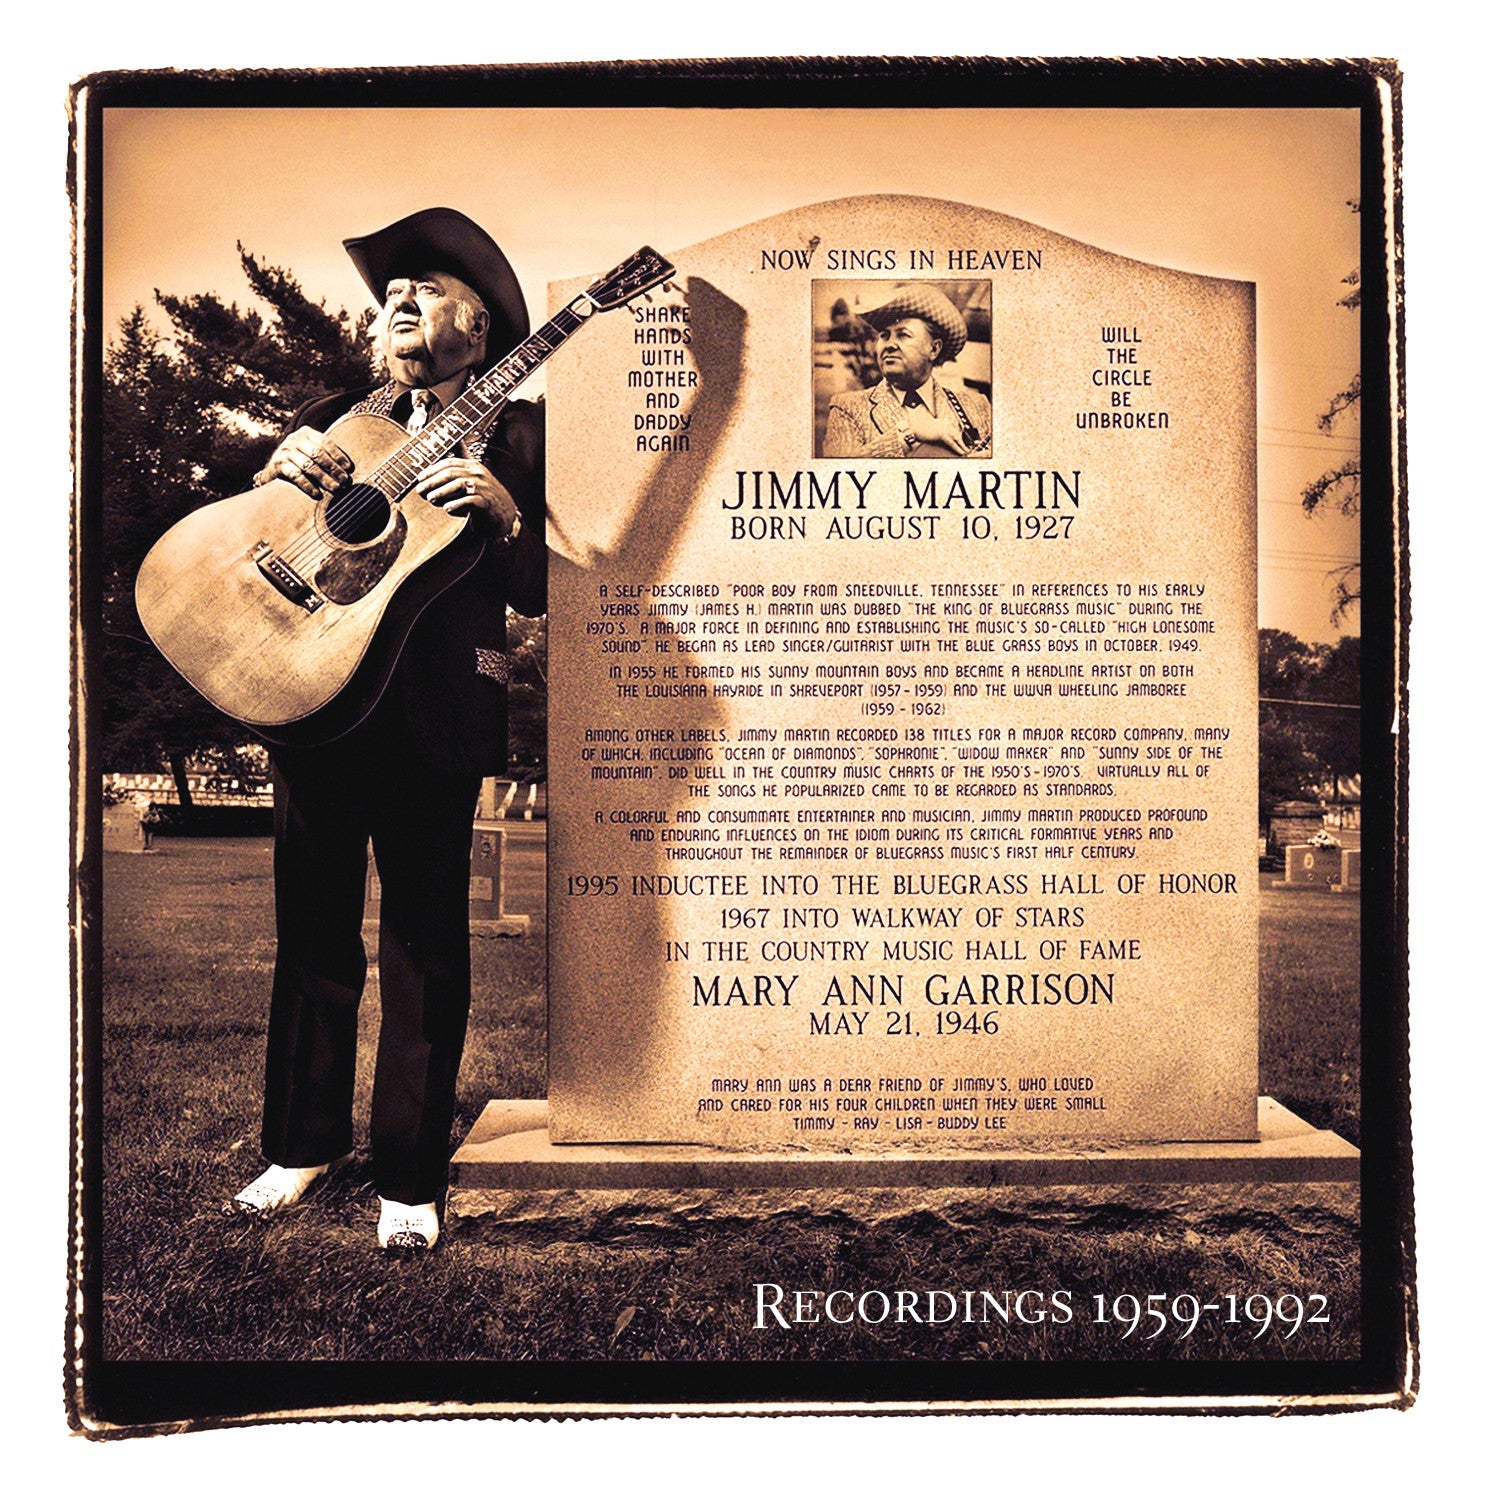 Jimmy Martin: Songs of a Free Born Man